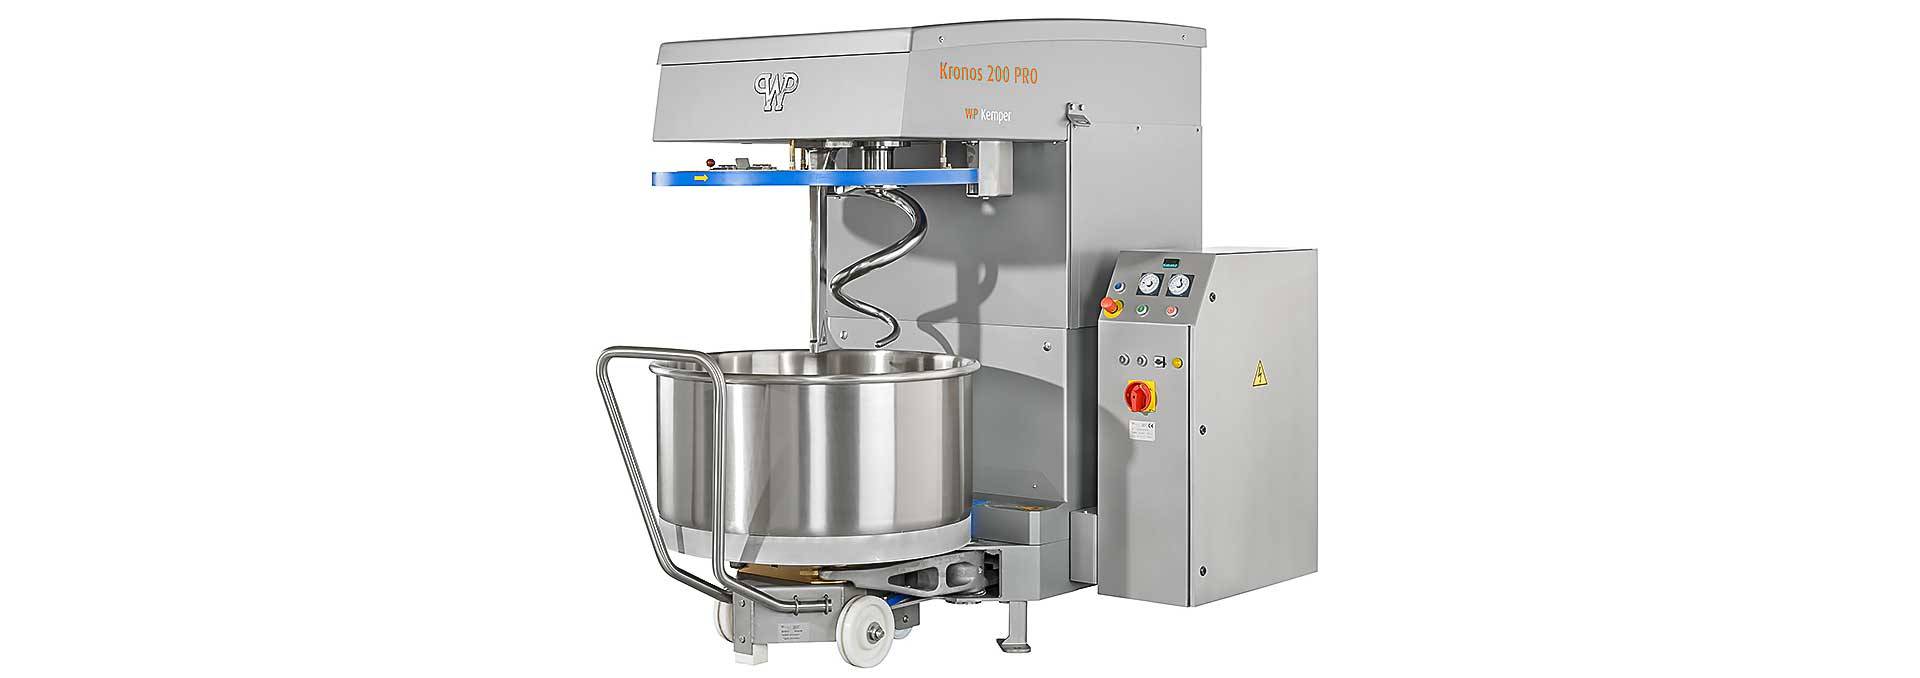 WP Kemper Kronos Spiral Mixer | WP Bakery Group USA, Retail, Wholesale, Commercial Bakery Equipment and Industrial Bakery Equipment, Shelton, CT USA